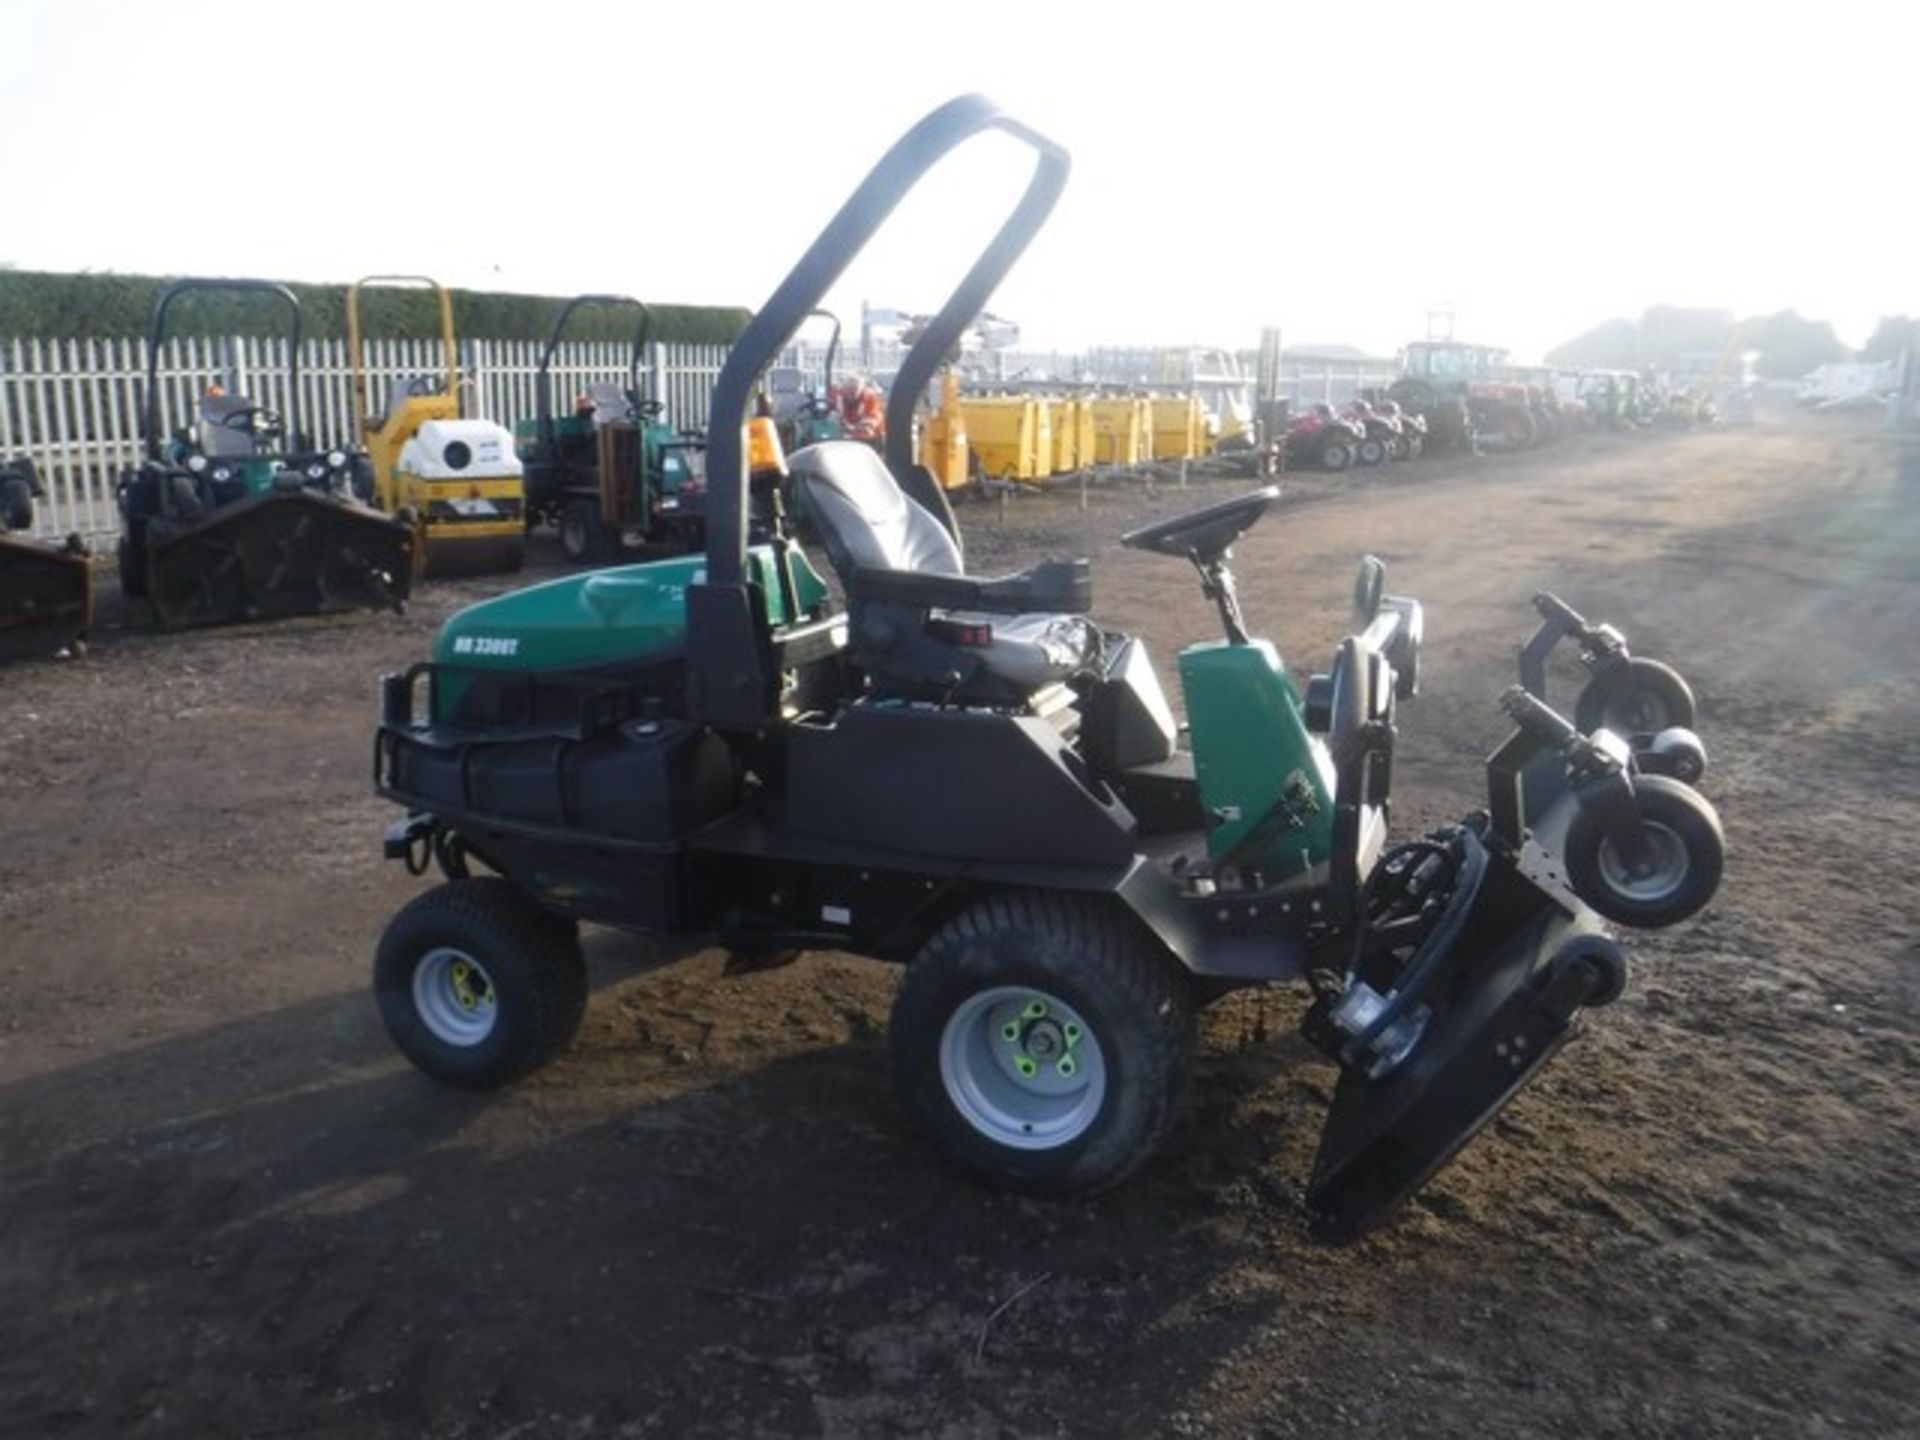 2010 RANSOMES HR 3300T diesel rotary ride on mower. REG NO SF10 GRK. FL NO CP3689. 3543 HRS - Image 3 of 6